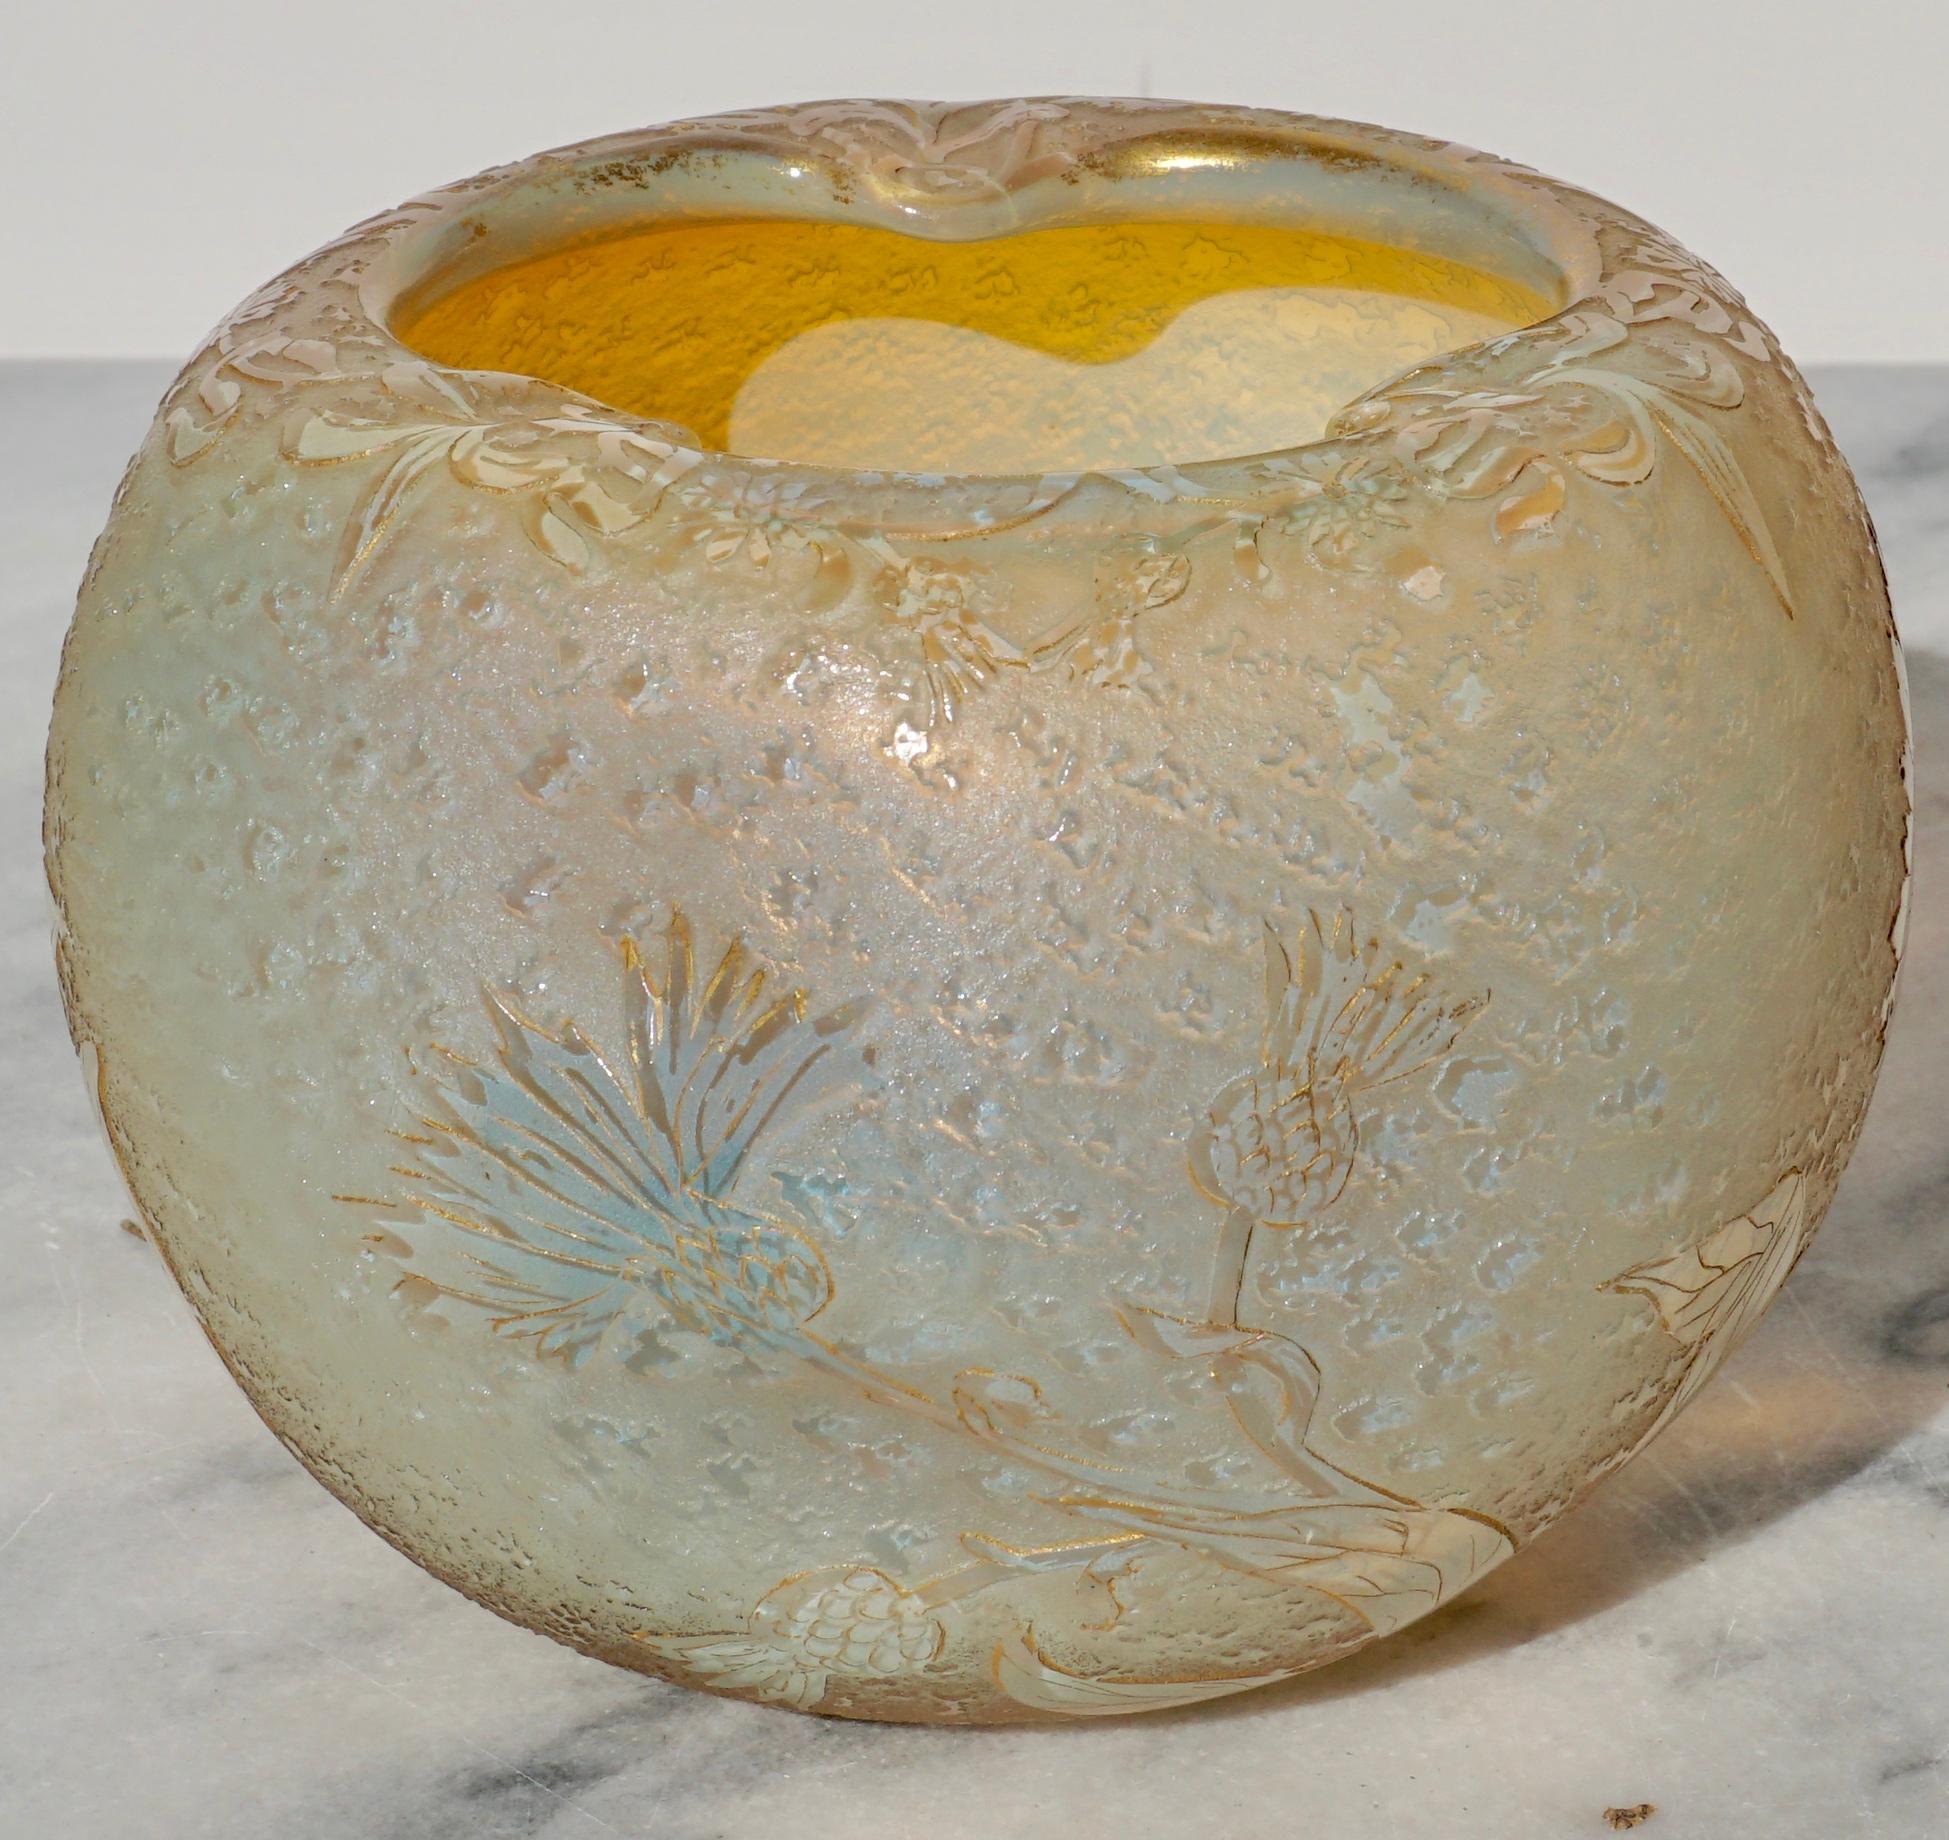 This Iridescent and opalescent acid etched and carved glass vase by Daum Nancy makes for a perfect bouquet of flowers. Dimpled or pinched three times at top opening shows remains of gold gilding as the whole vase does throughout. 

Signed in